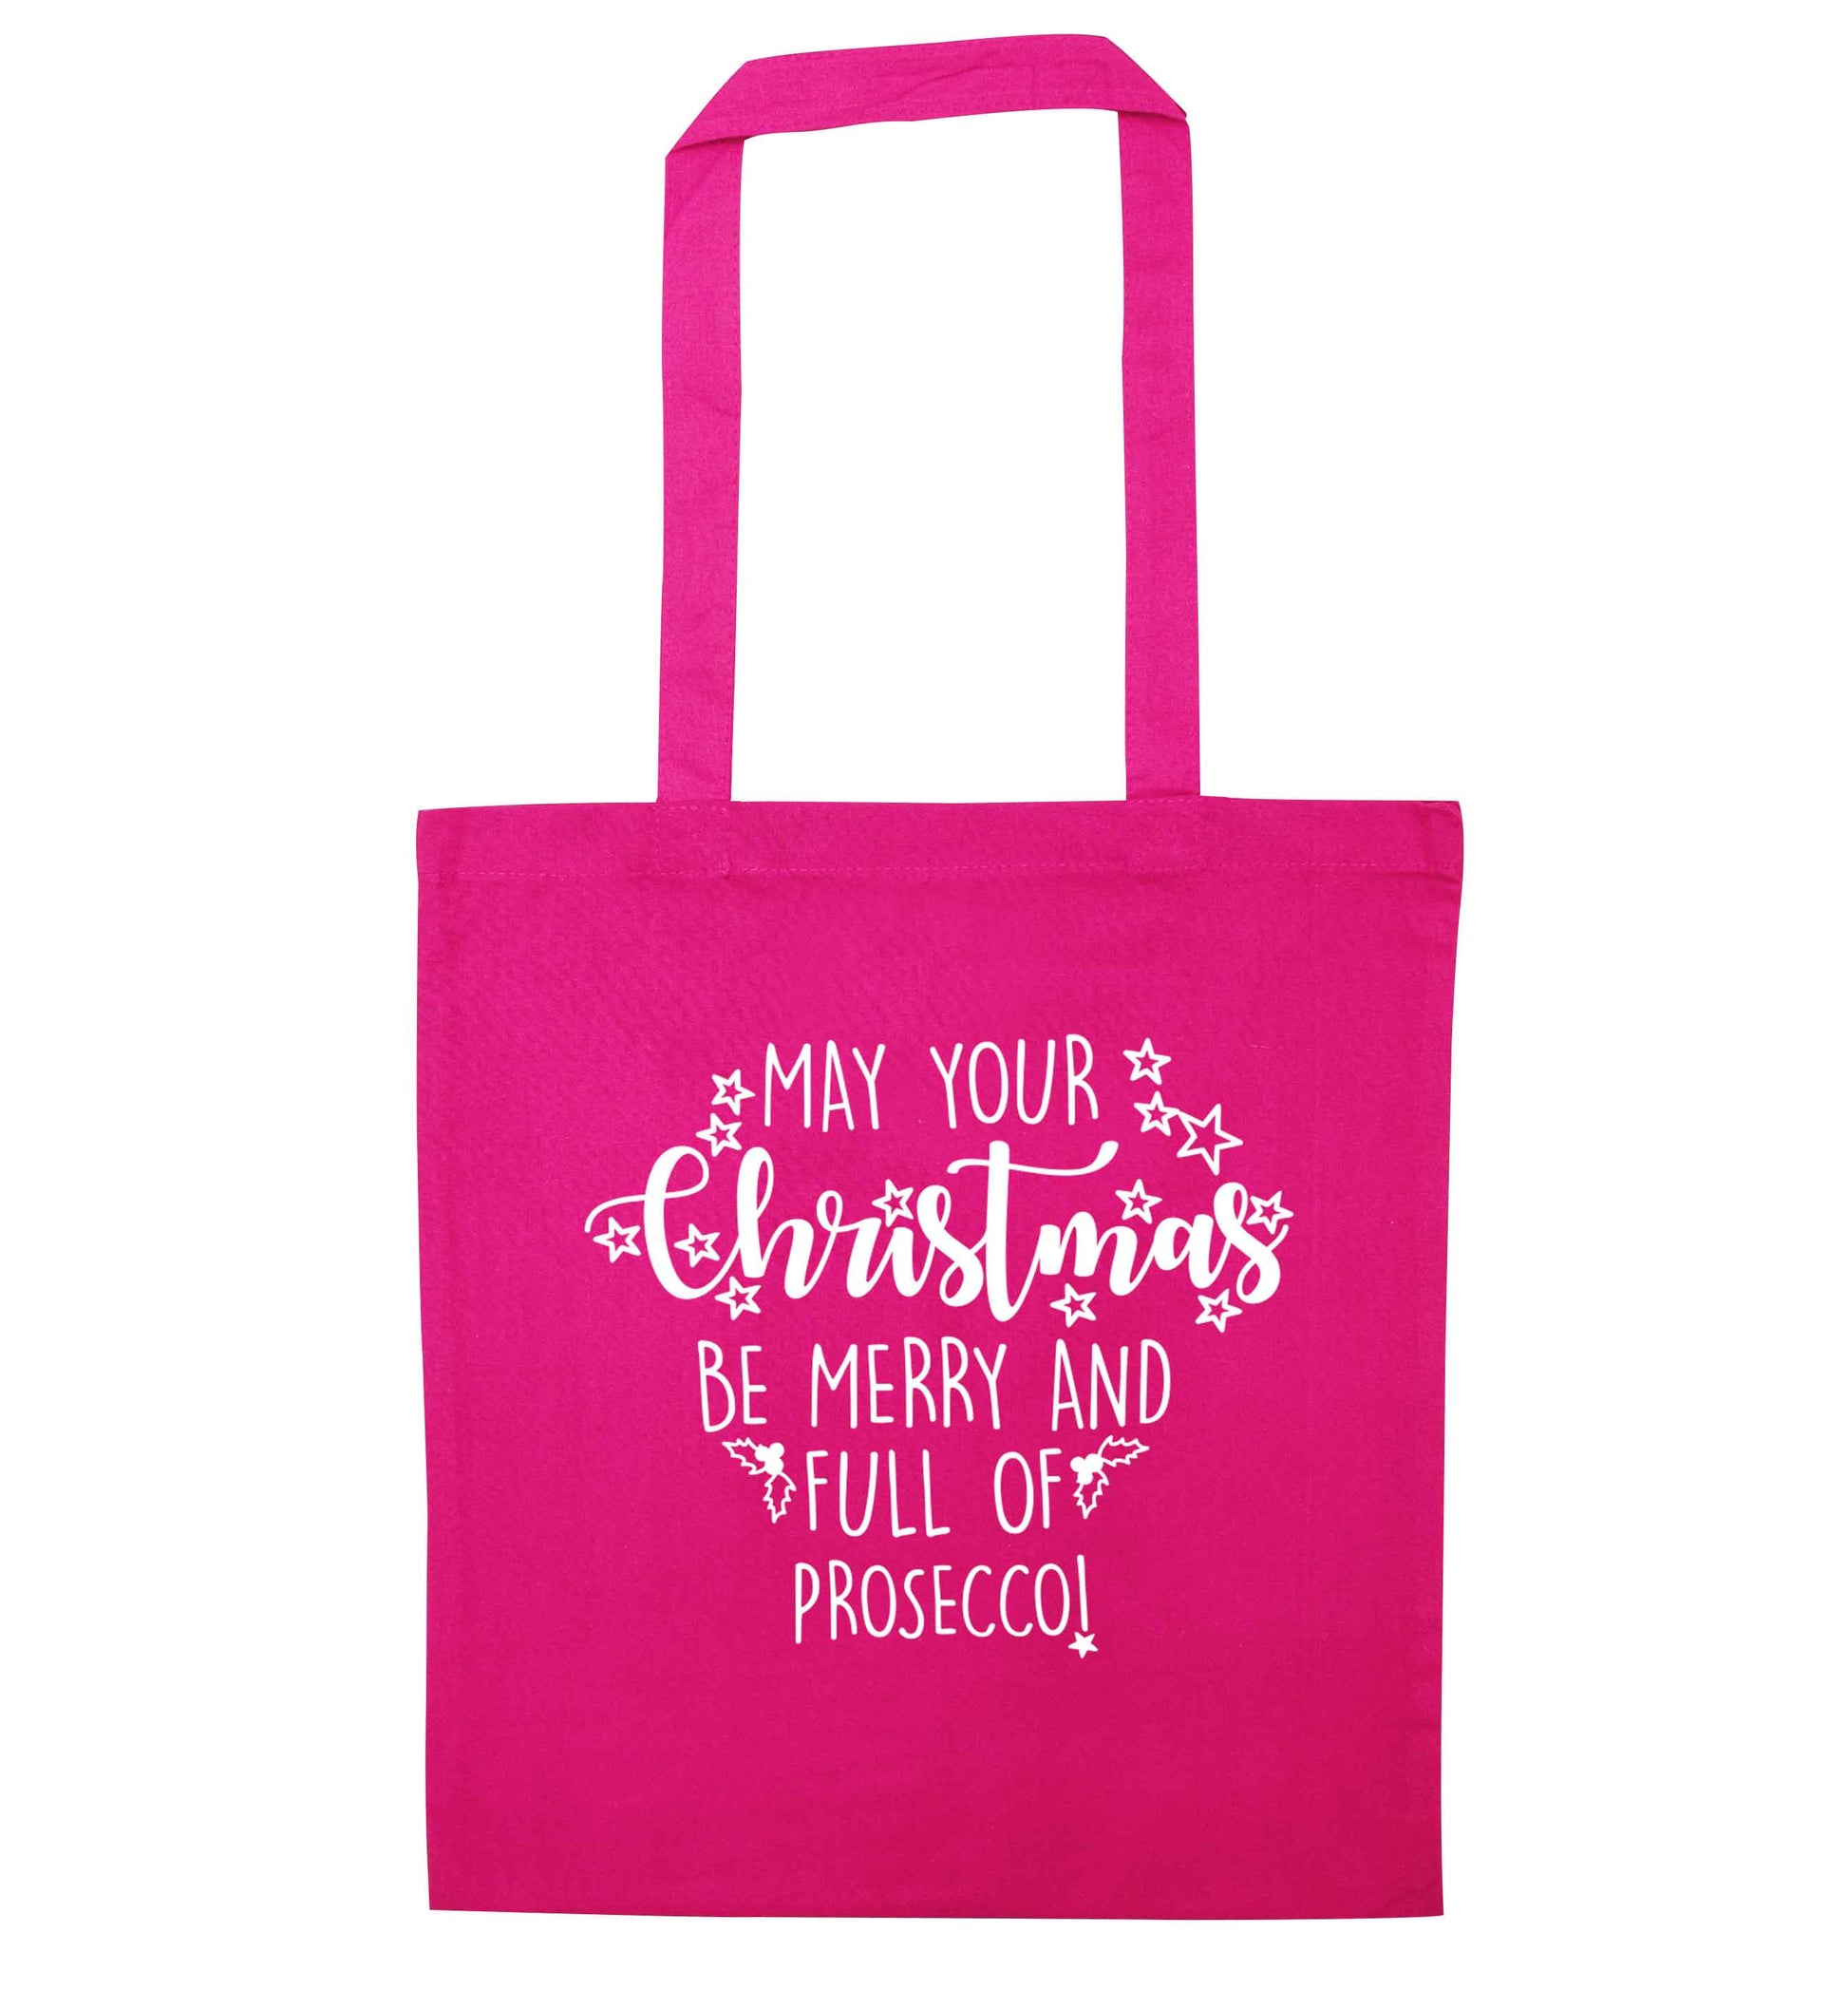 May your Christmas be merry and full of prosecco pink tote bag